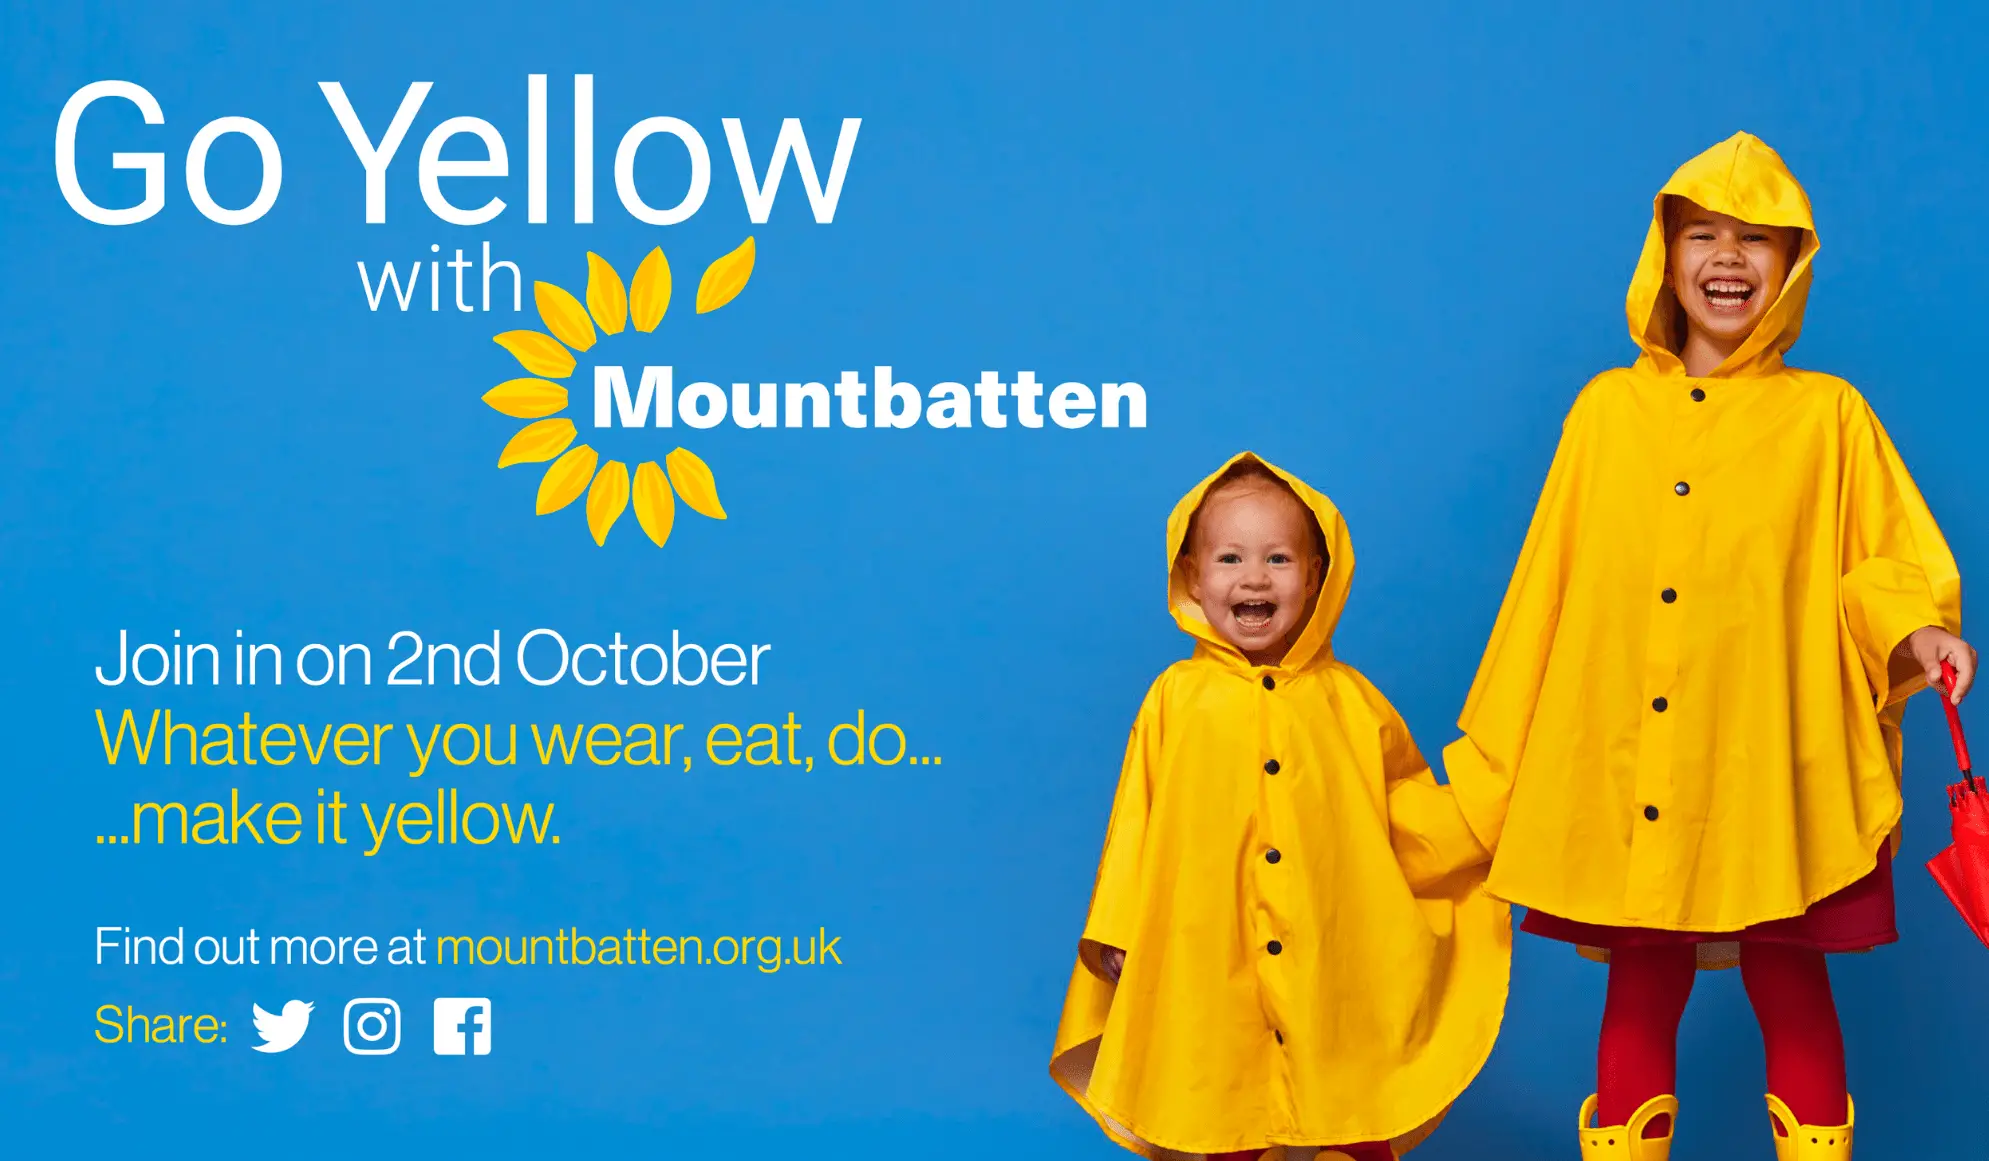 Go Yellow 2020 poster feature two children in yellow raincoats